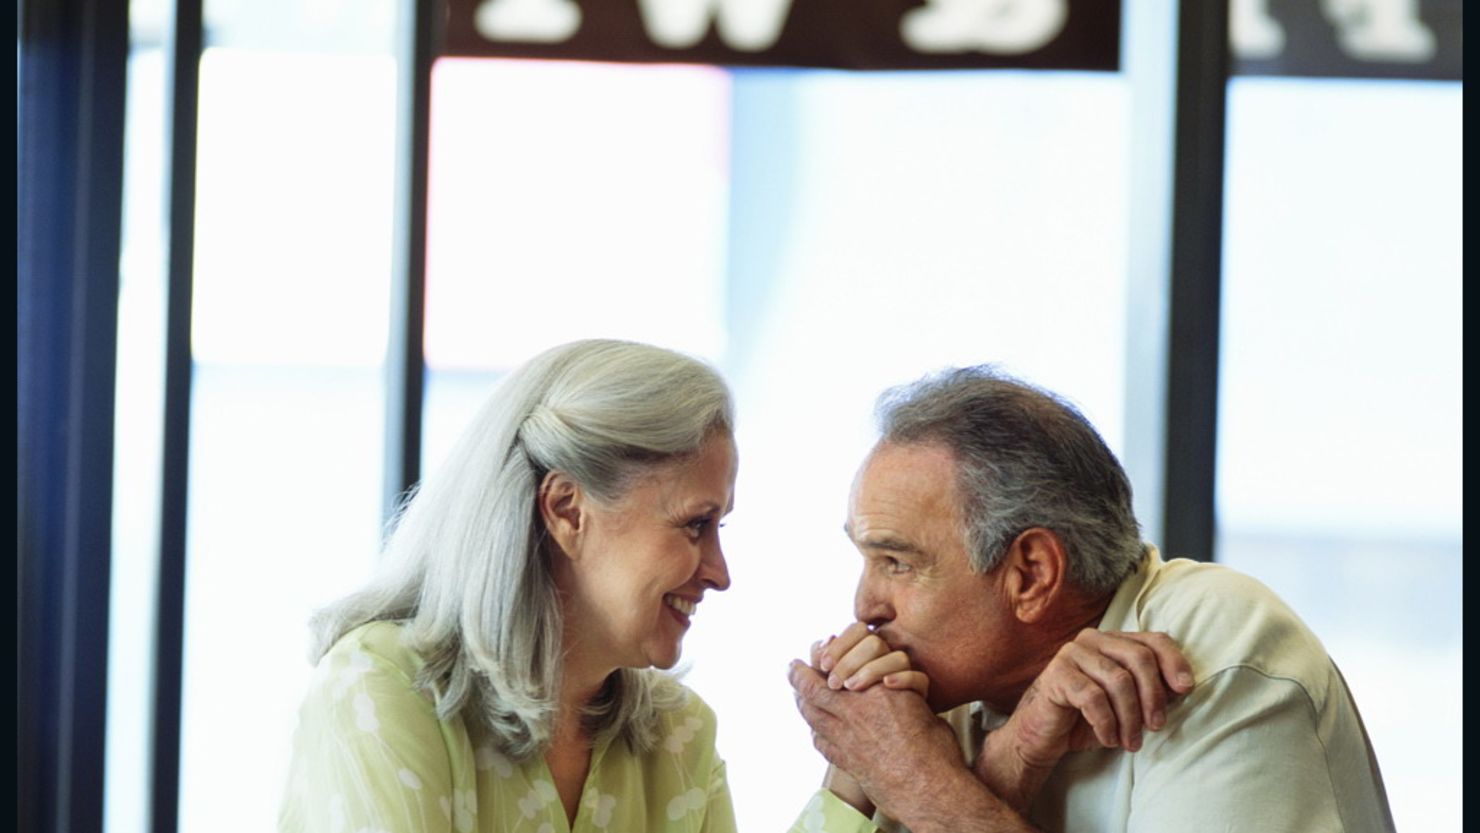 No matter the age, you're never too old for dating.